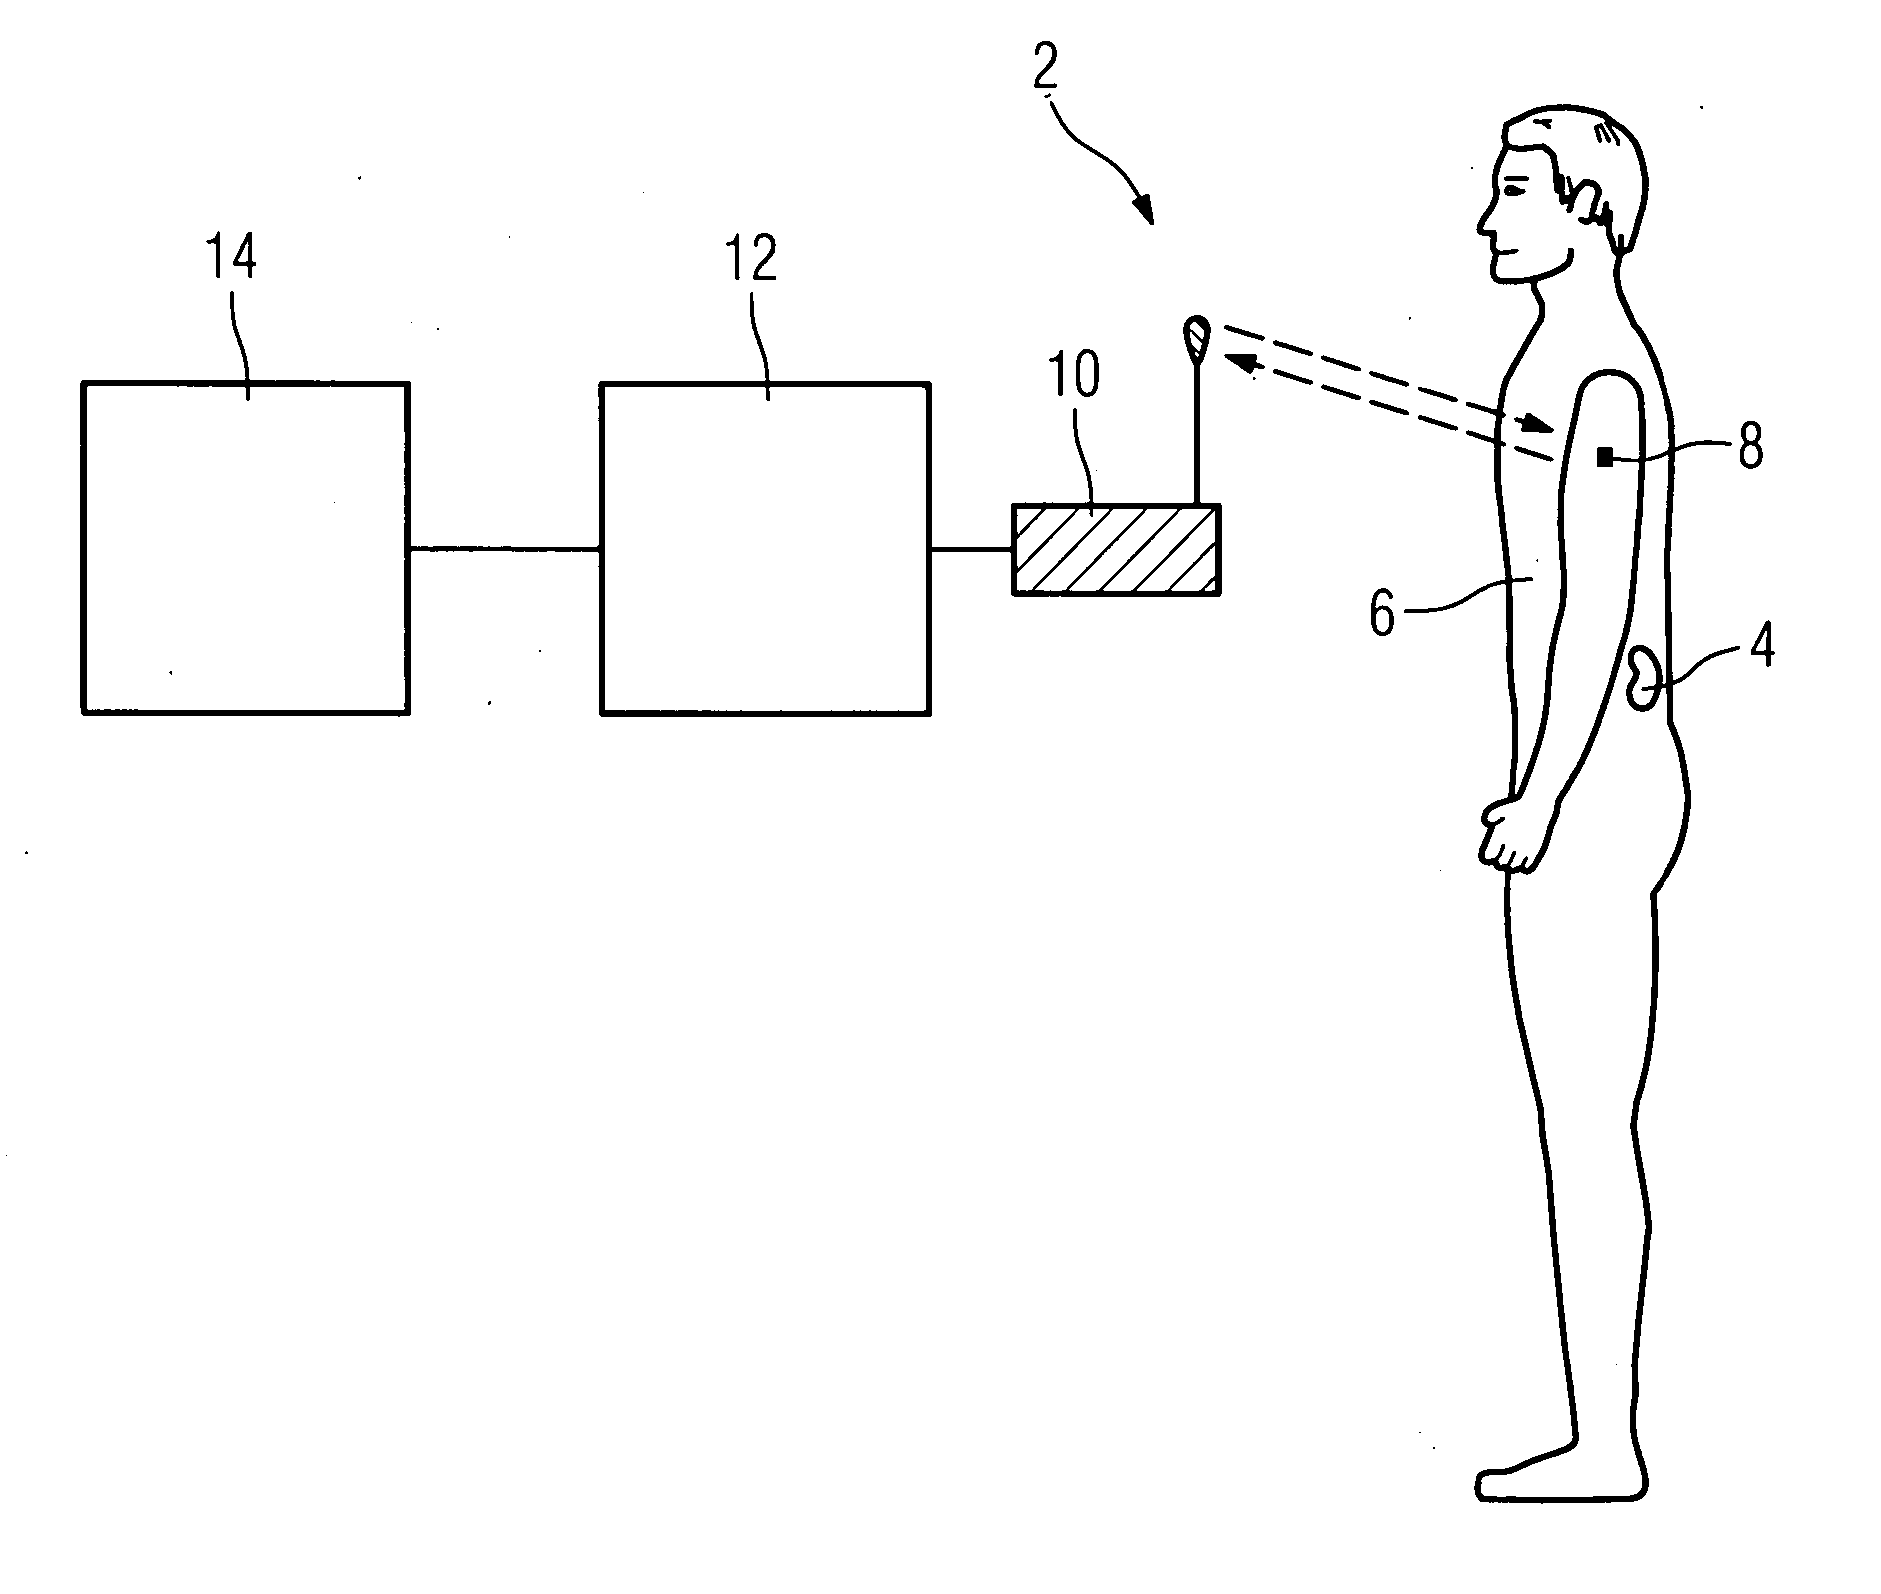 Method and system for identification of a medical implant